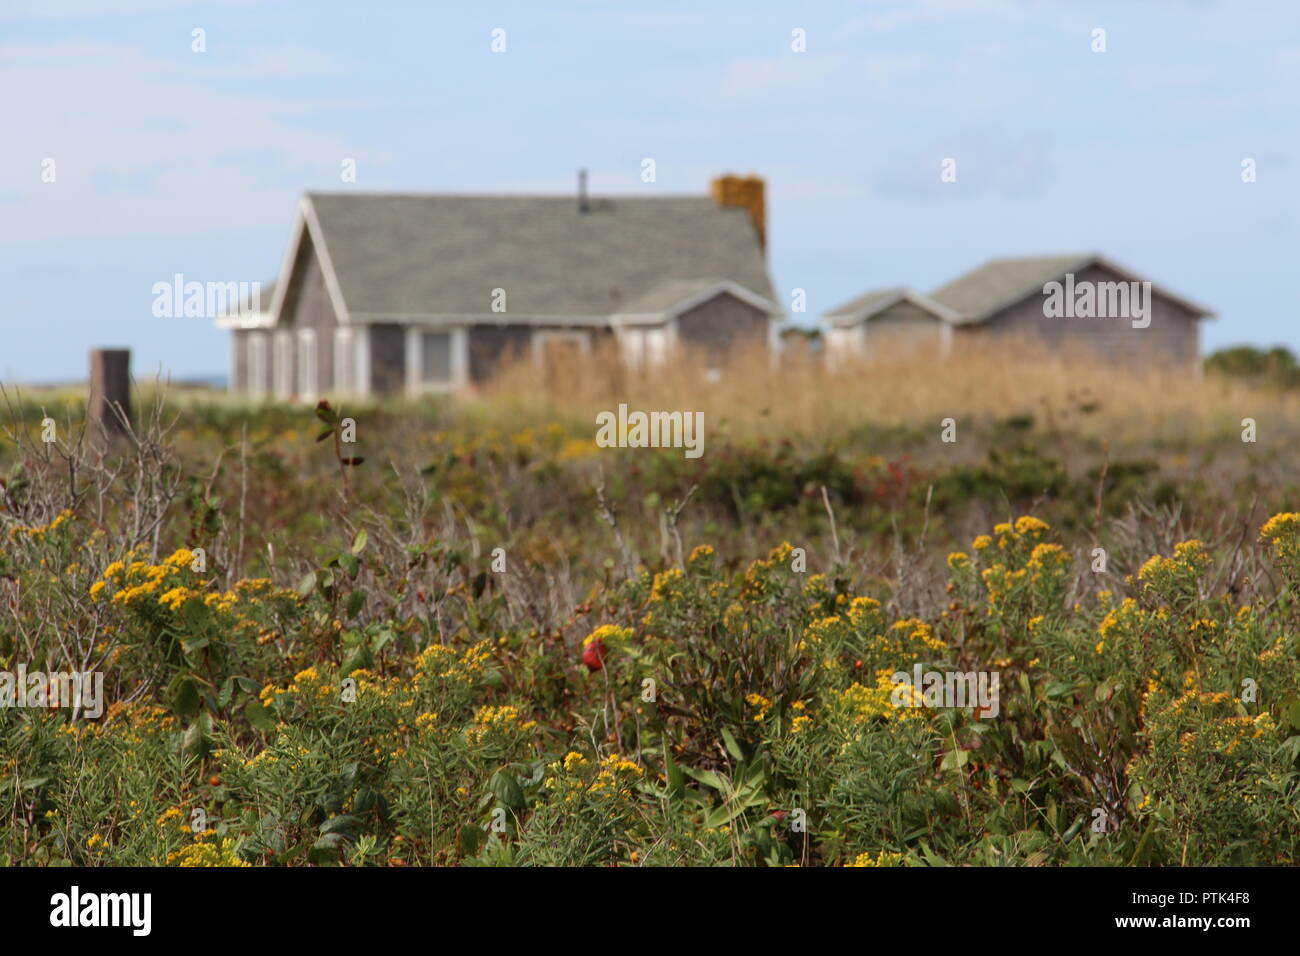 A farm house in America, field and trees. Stock Photo